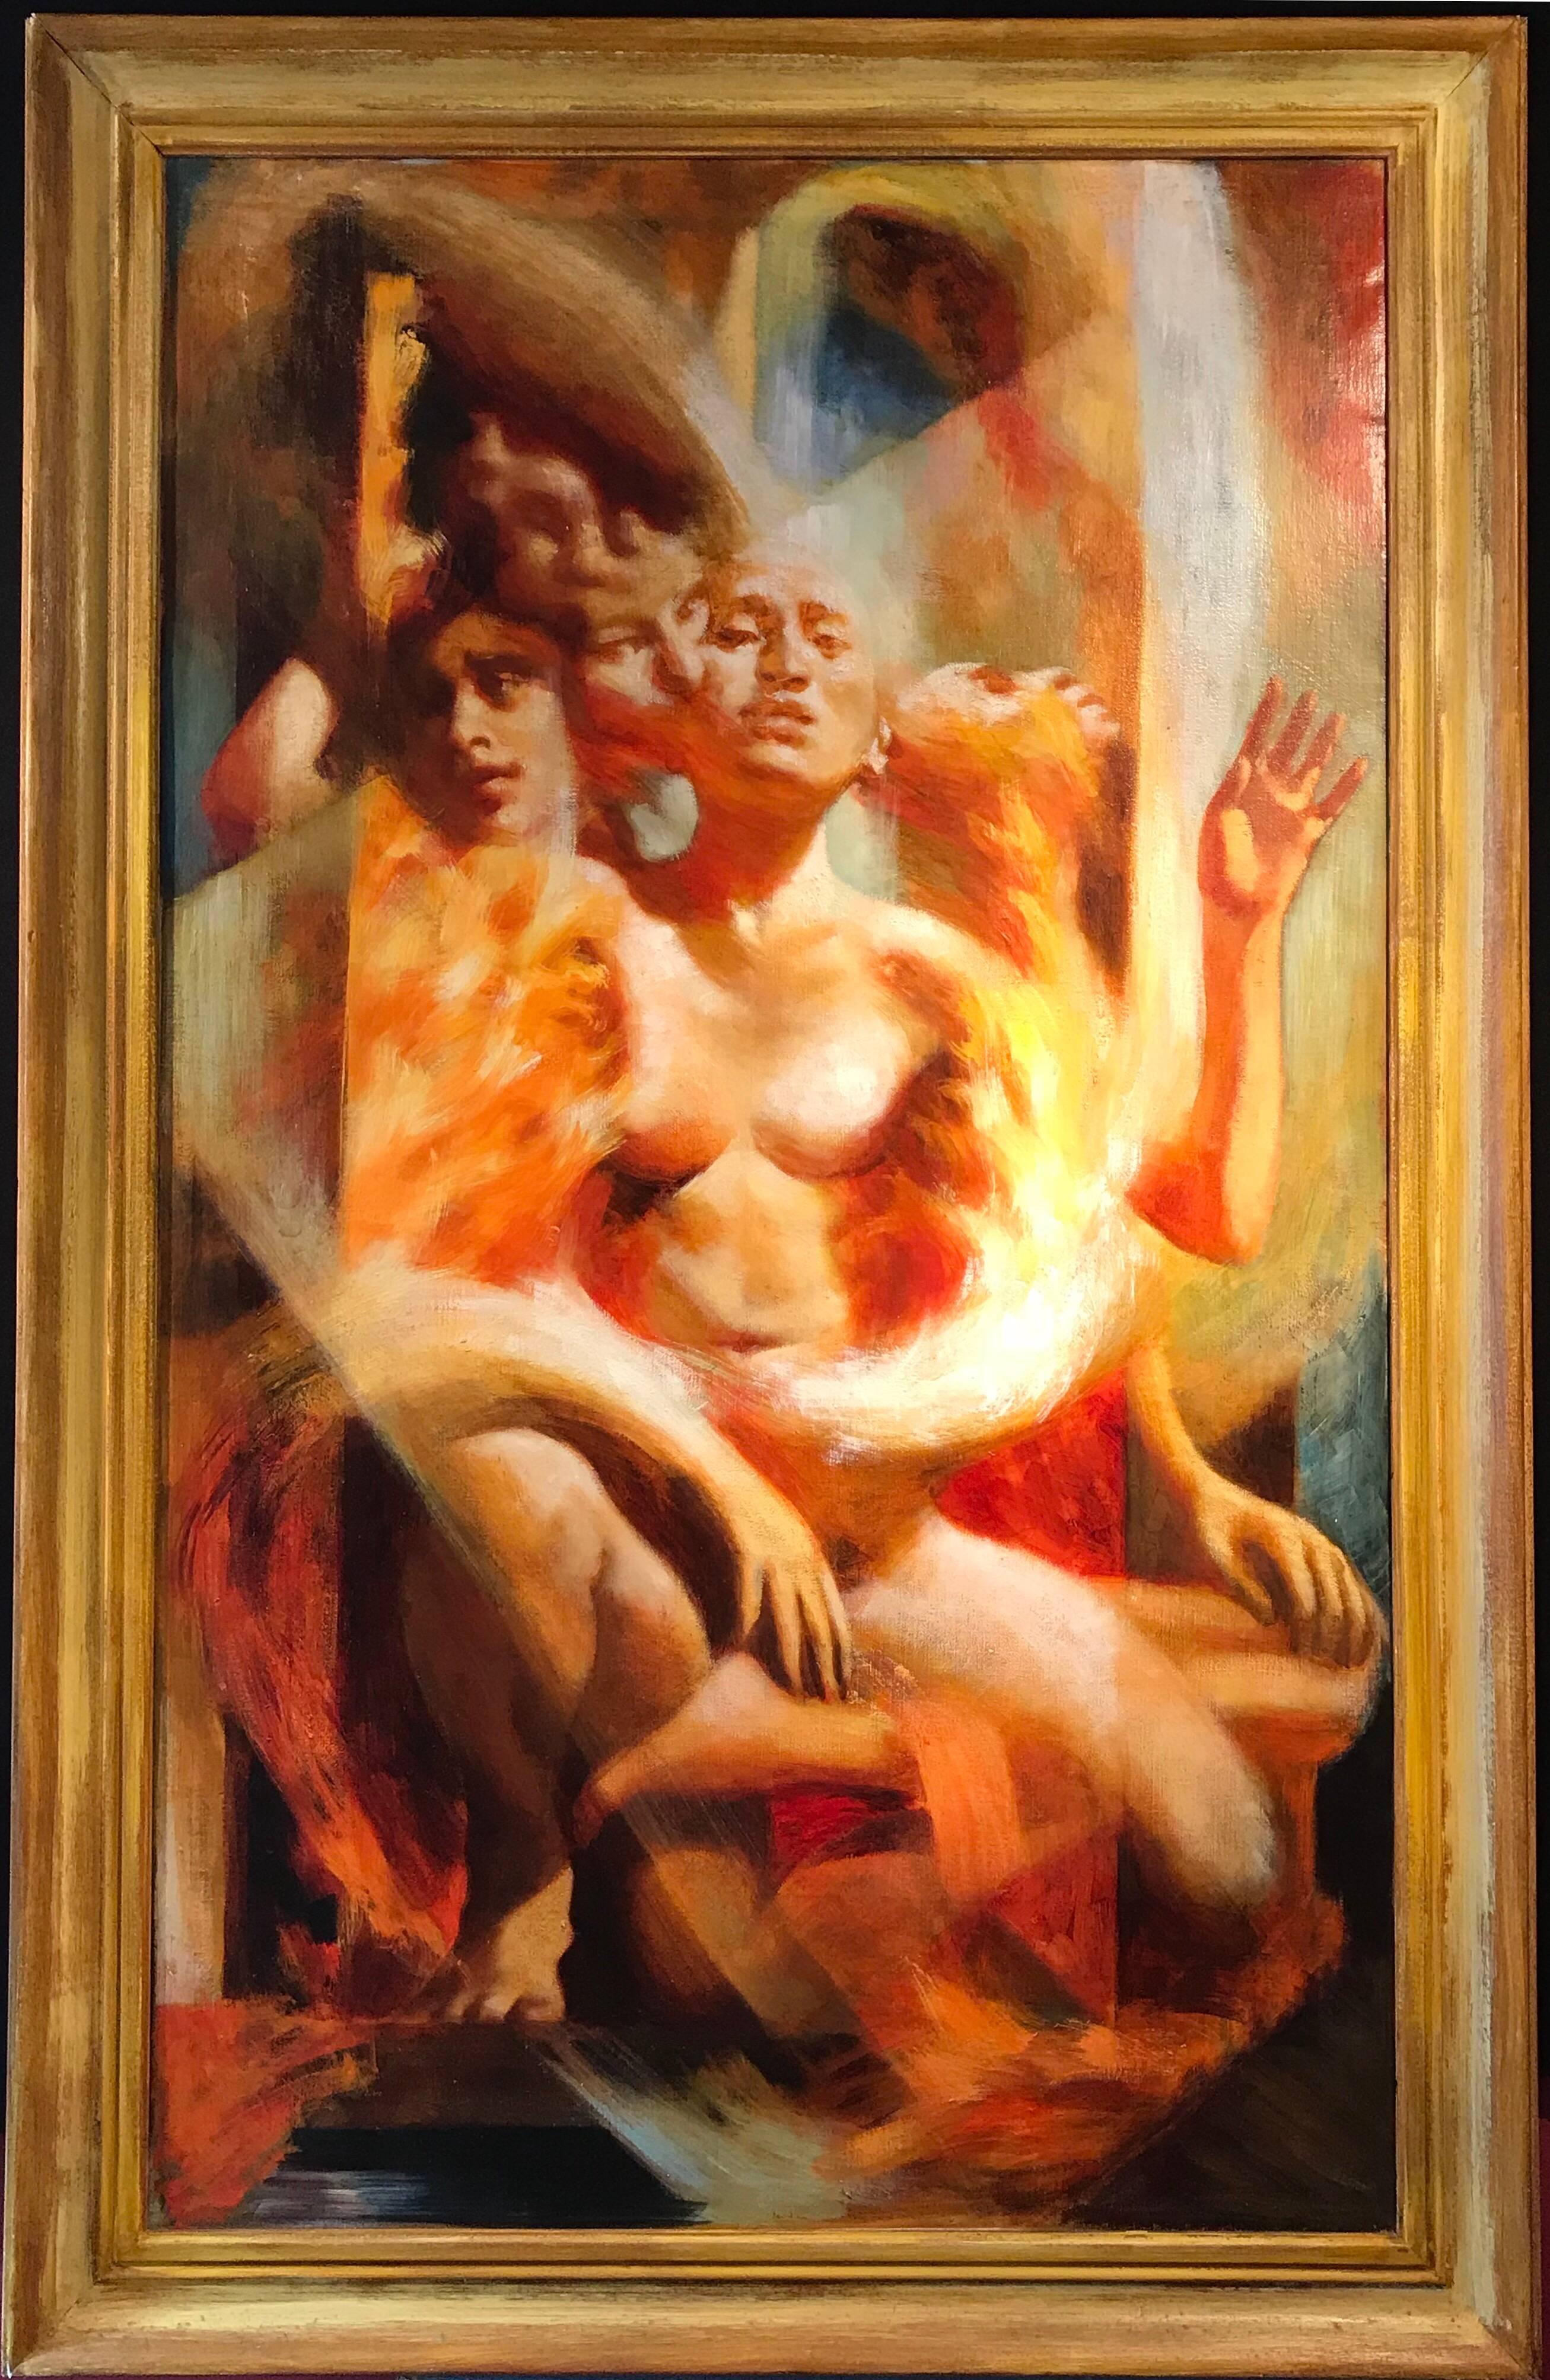 Unknown Nude Painting - Huge Surrealist Haunting Oil Nude Lady